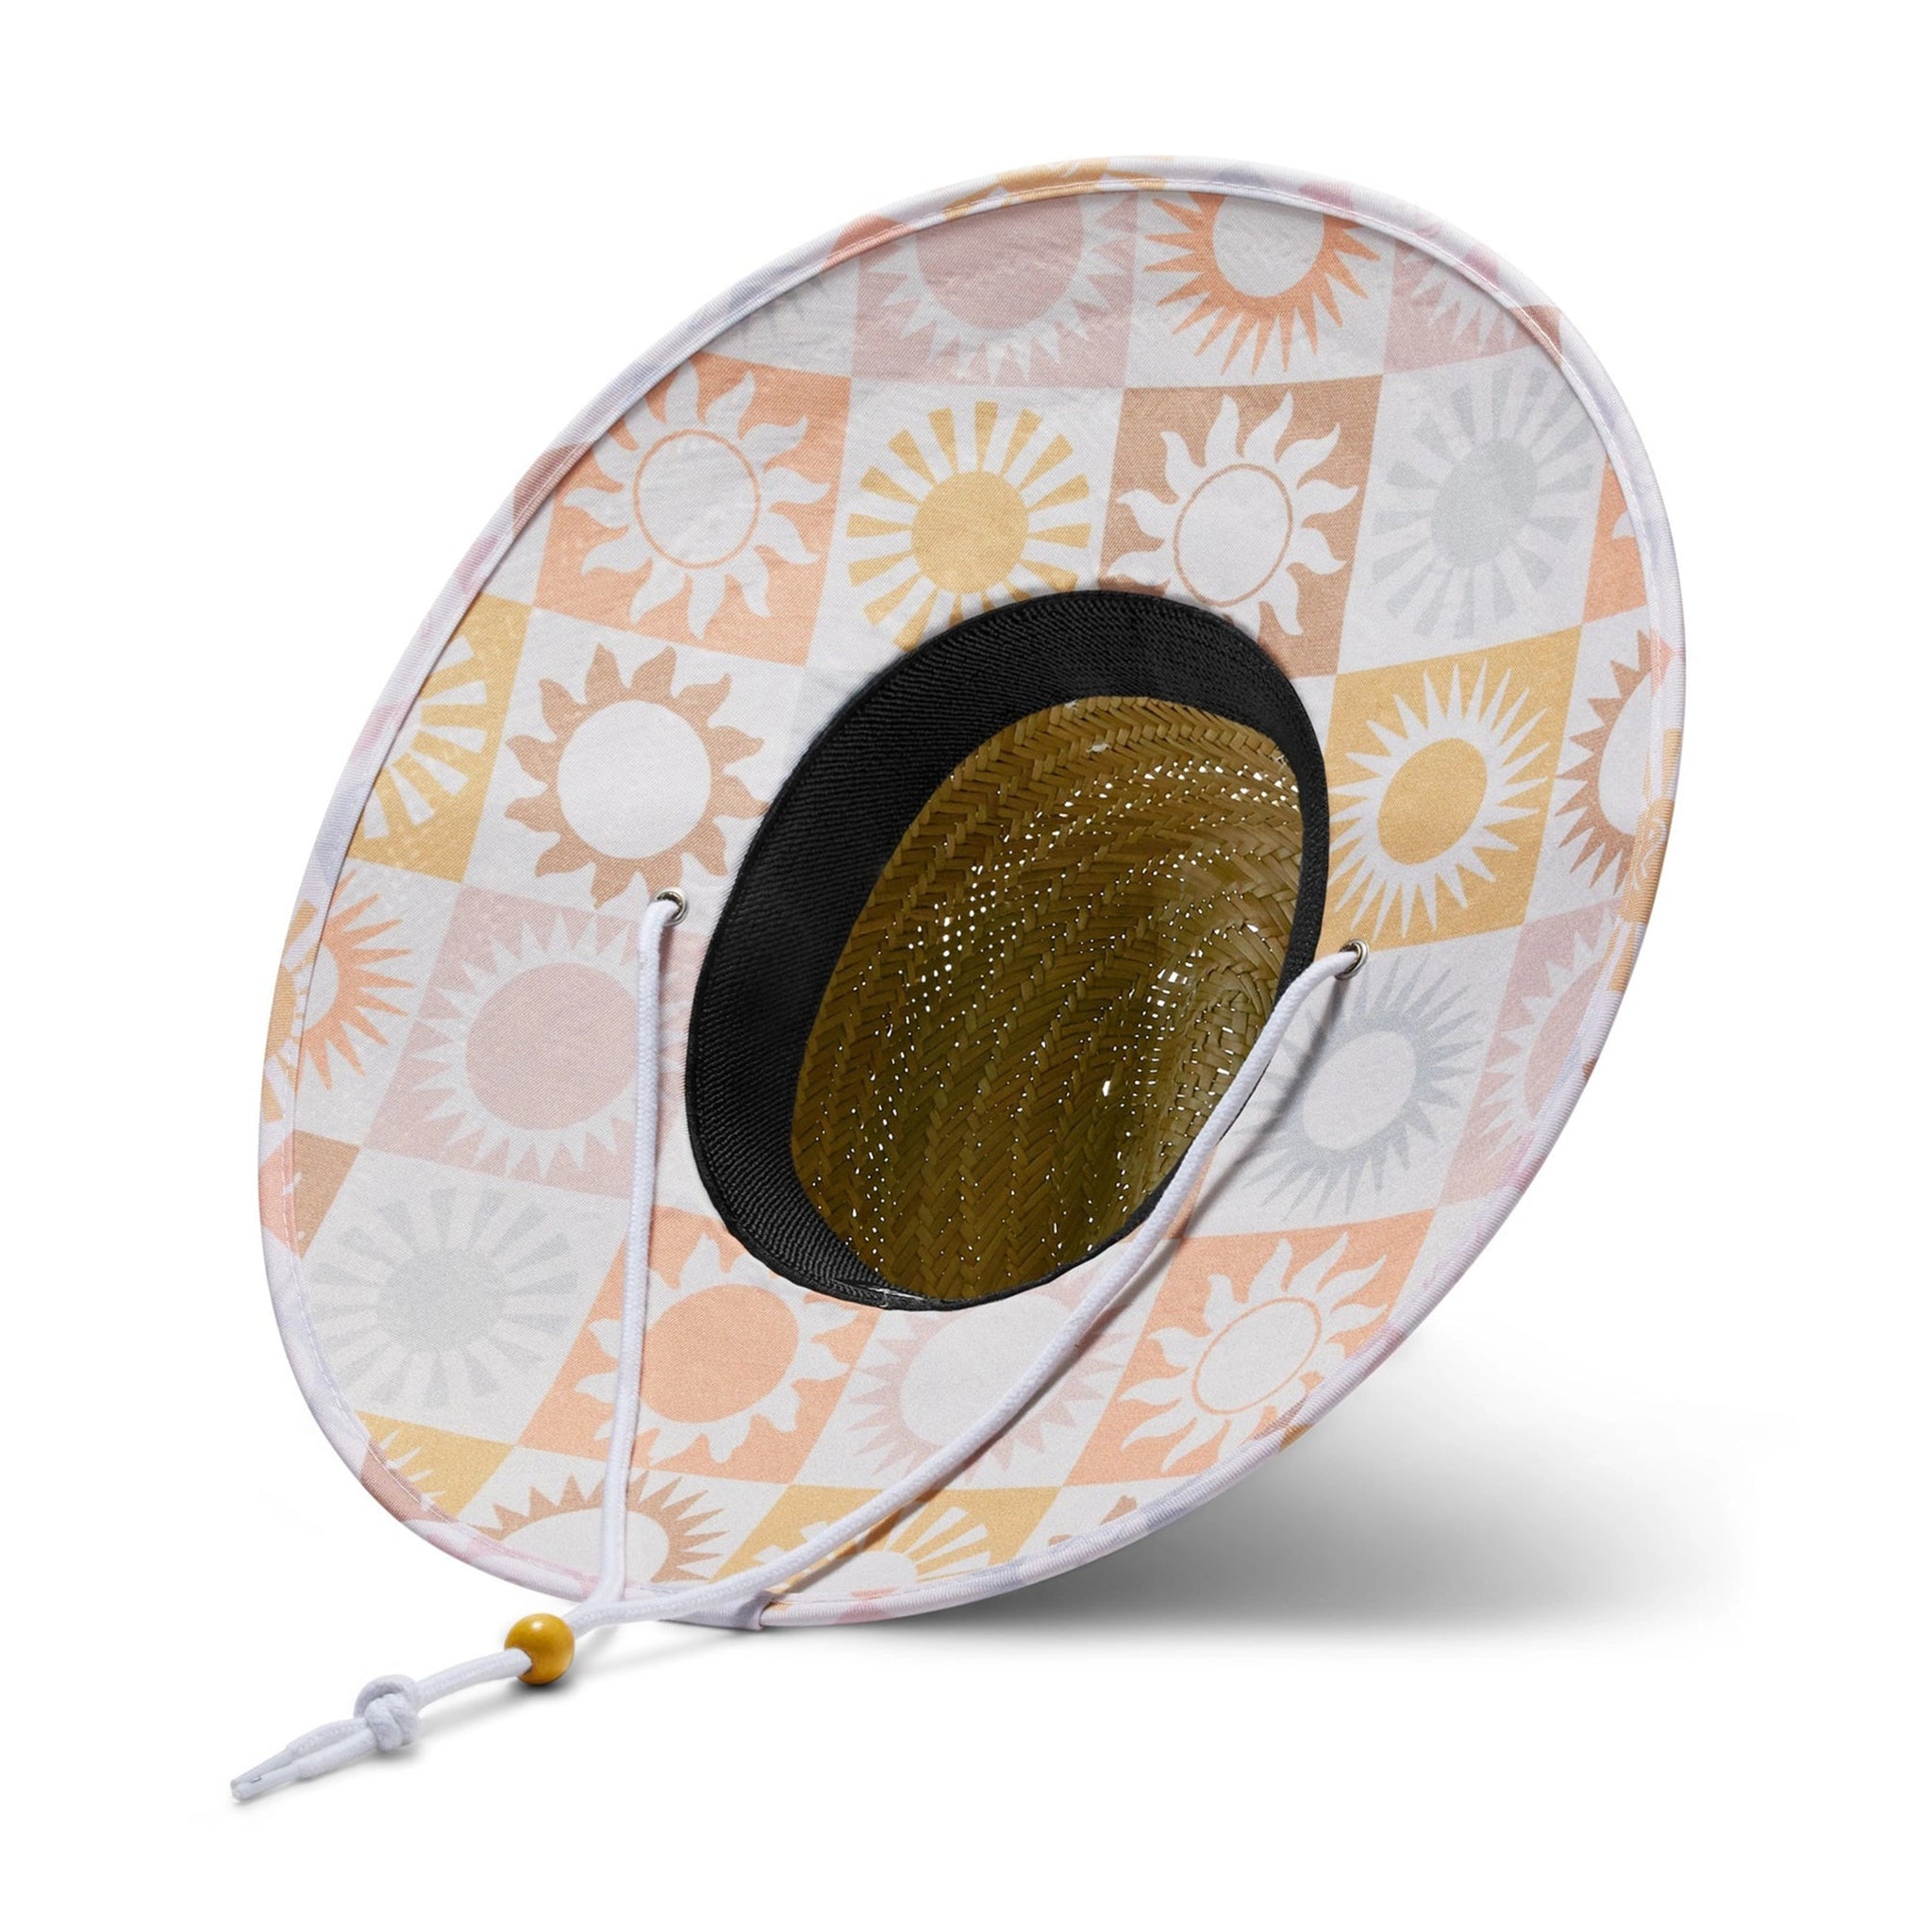 On a white background is a neutral colored straw sun hat with a neckstrap and a light pink and light orange sun design on the underside of the brim.